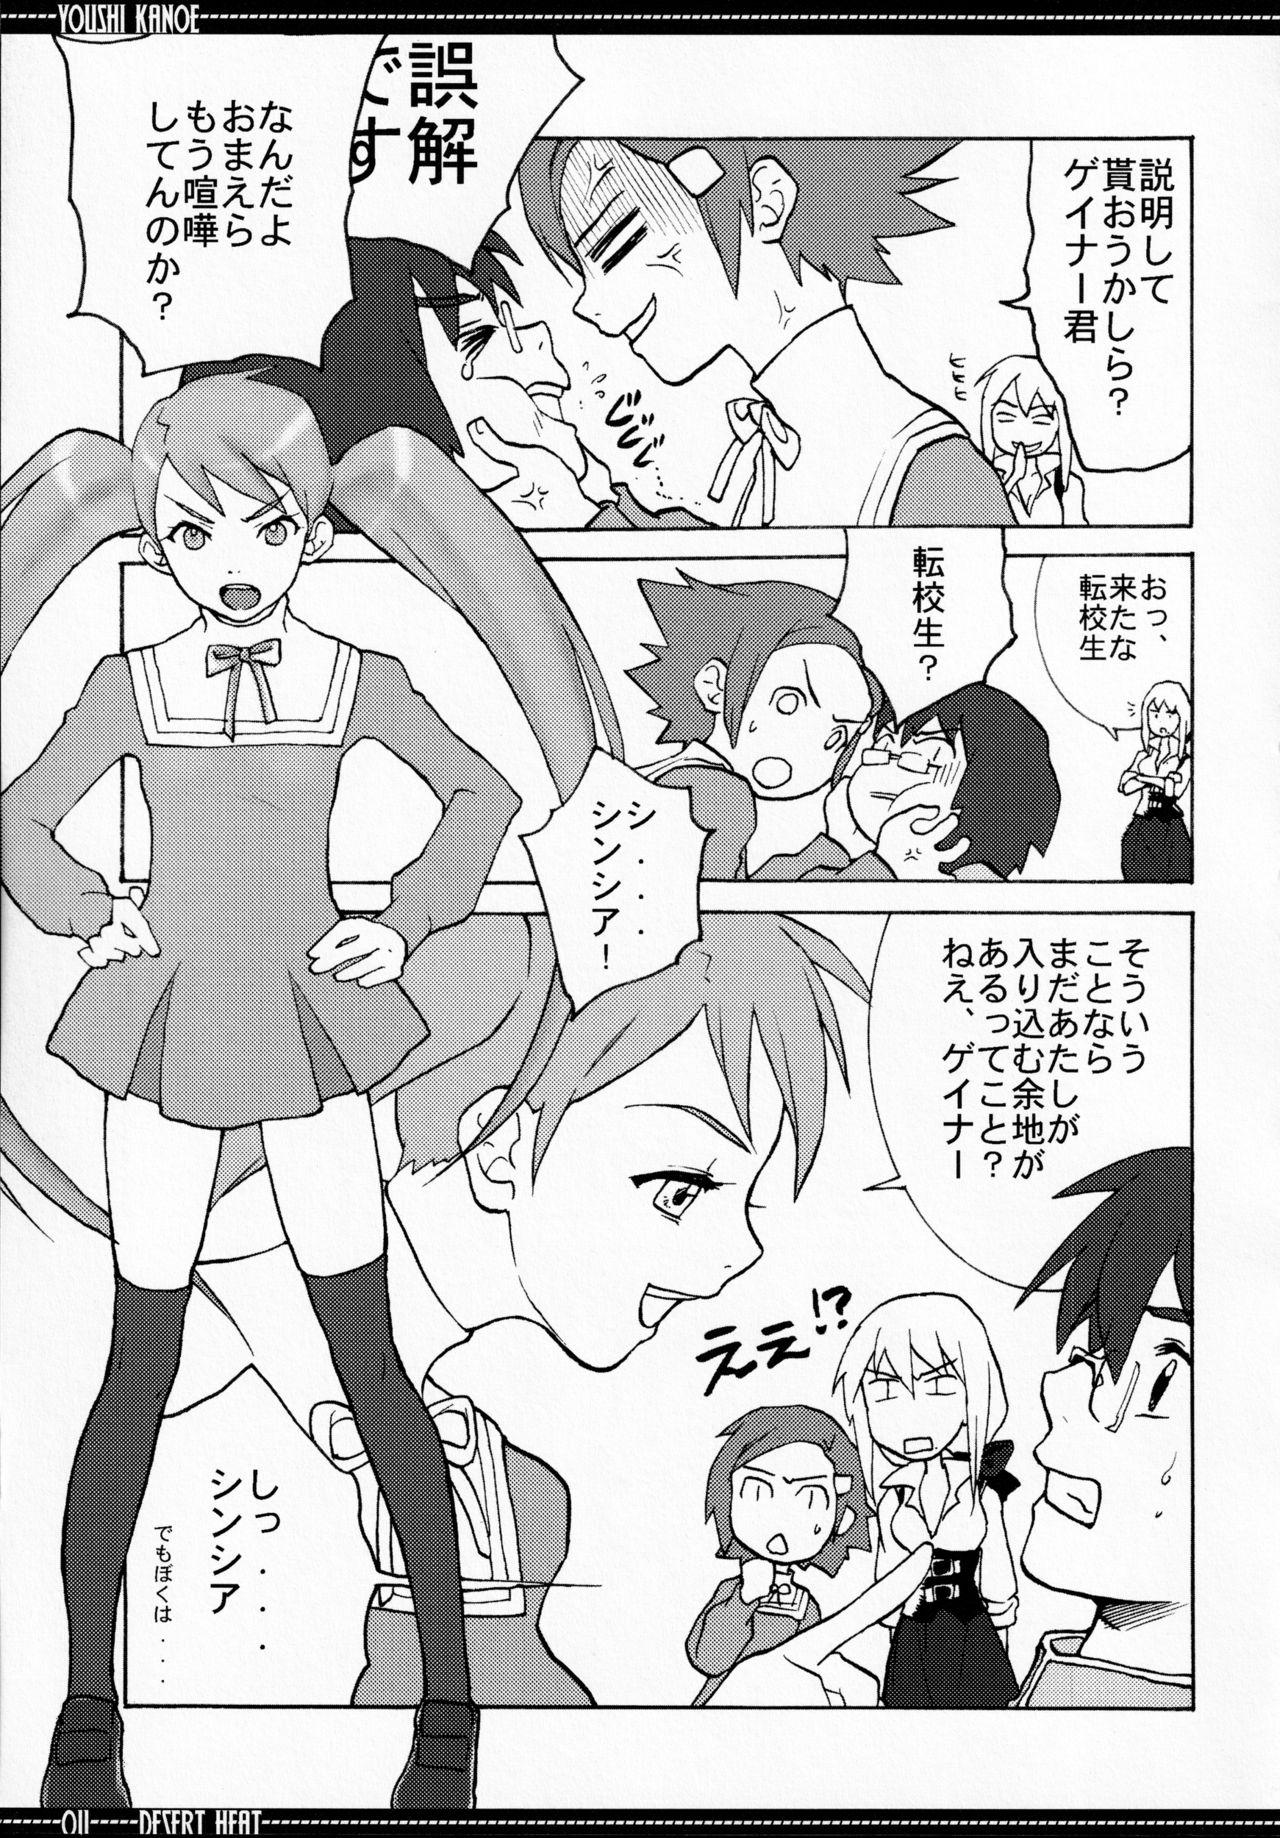 Muscles DESERT HEAT - Overman king gainer Tgirls - Page 10